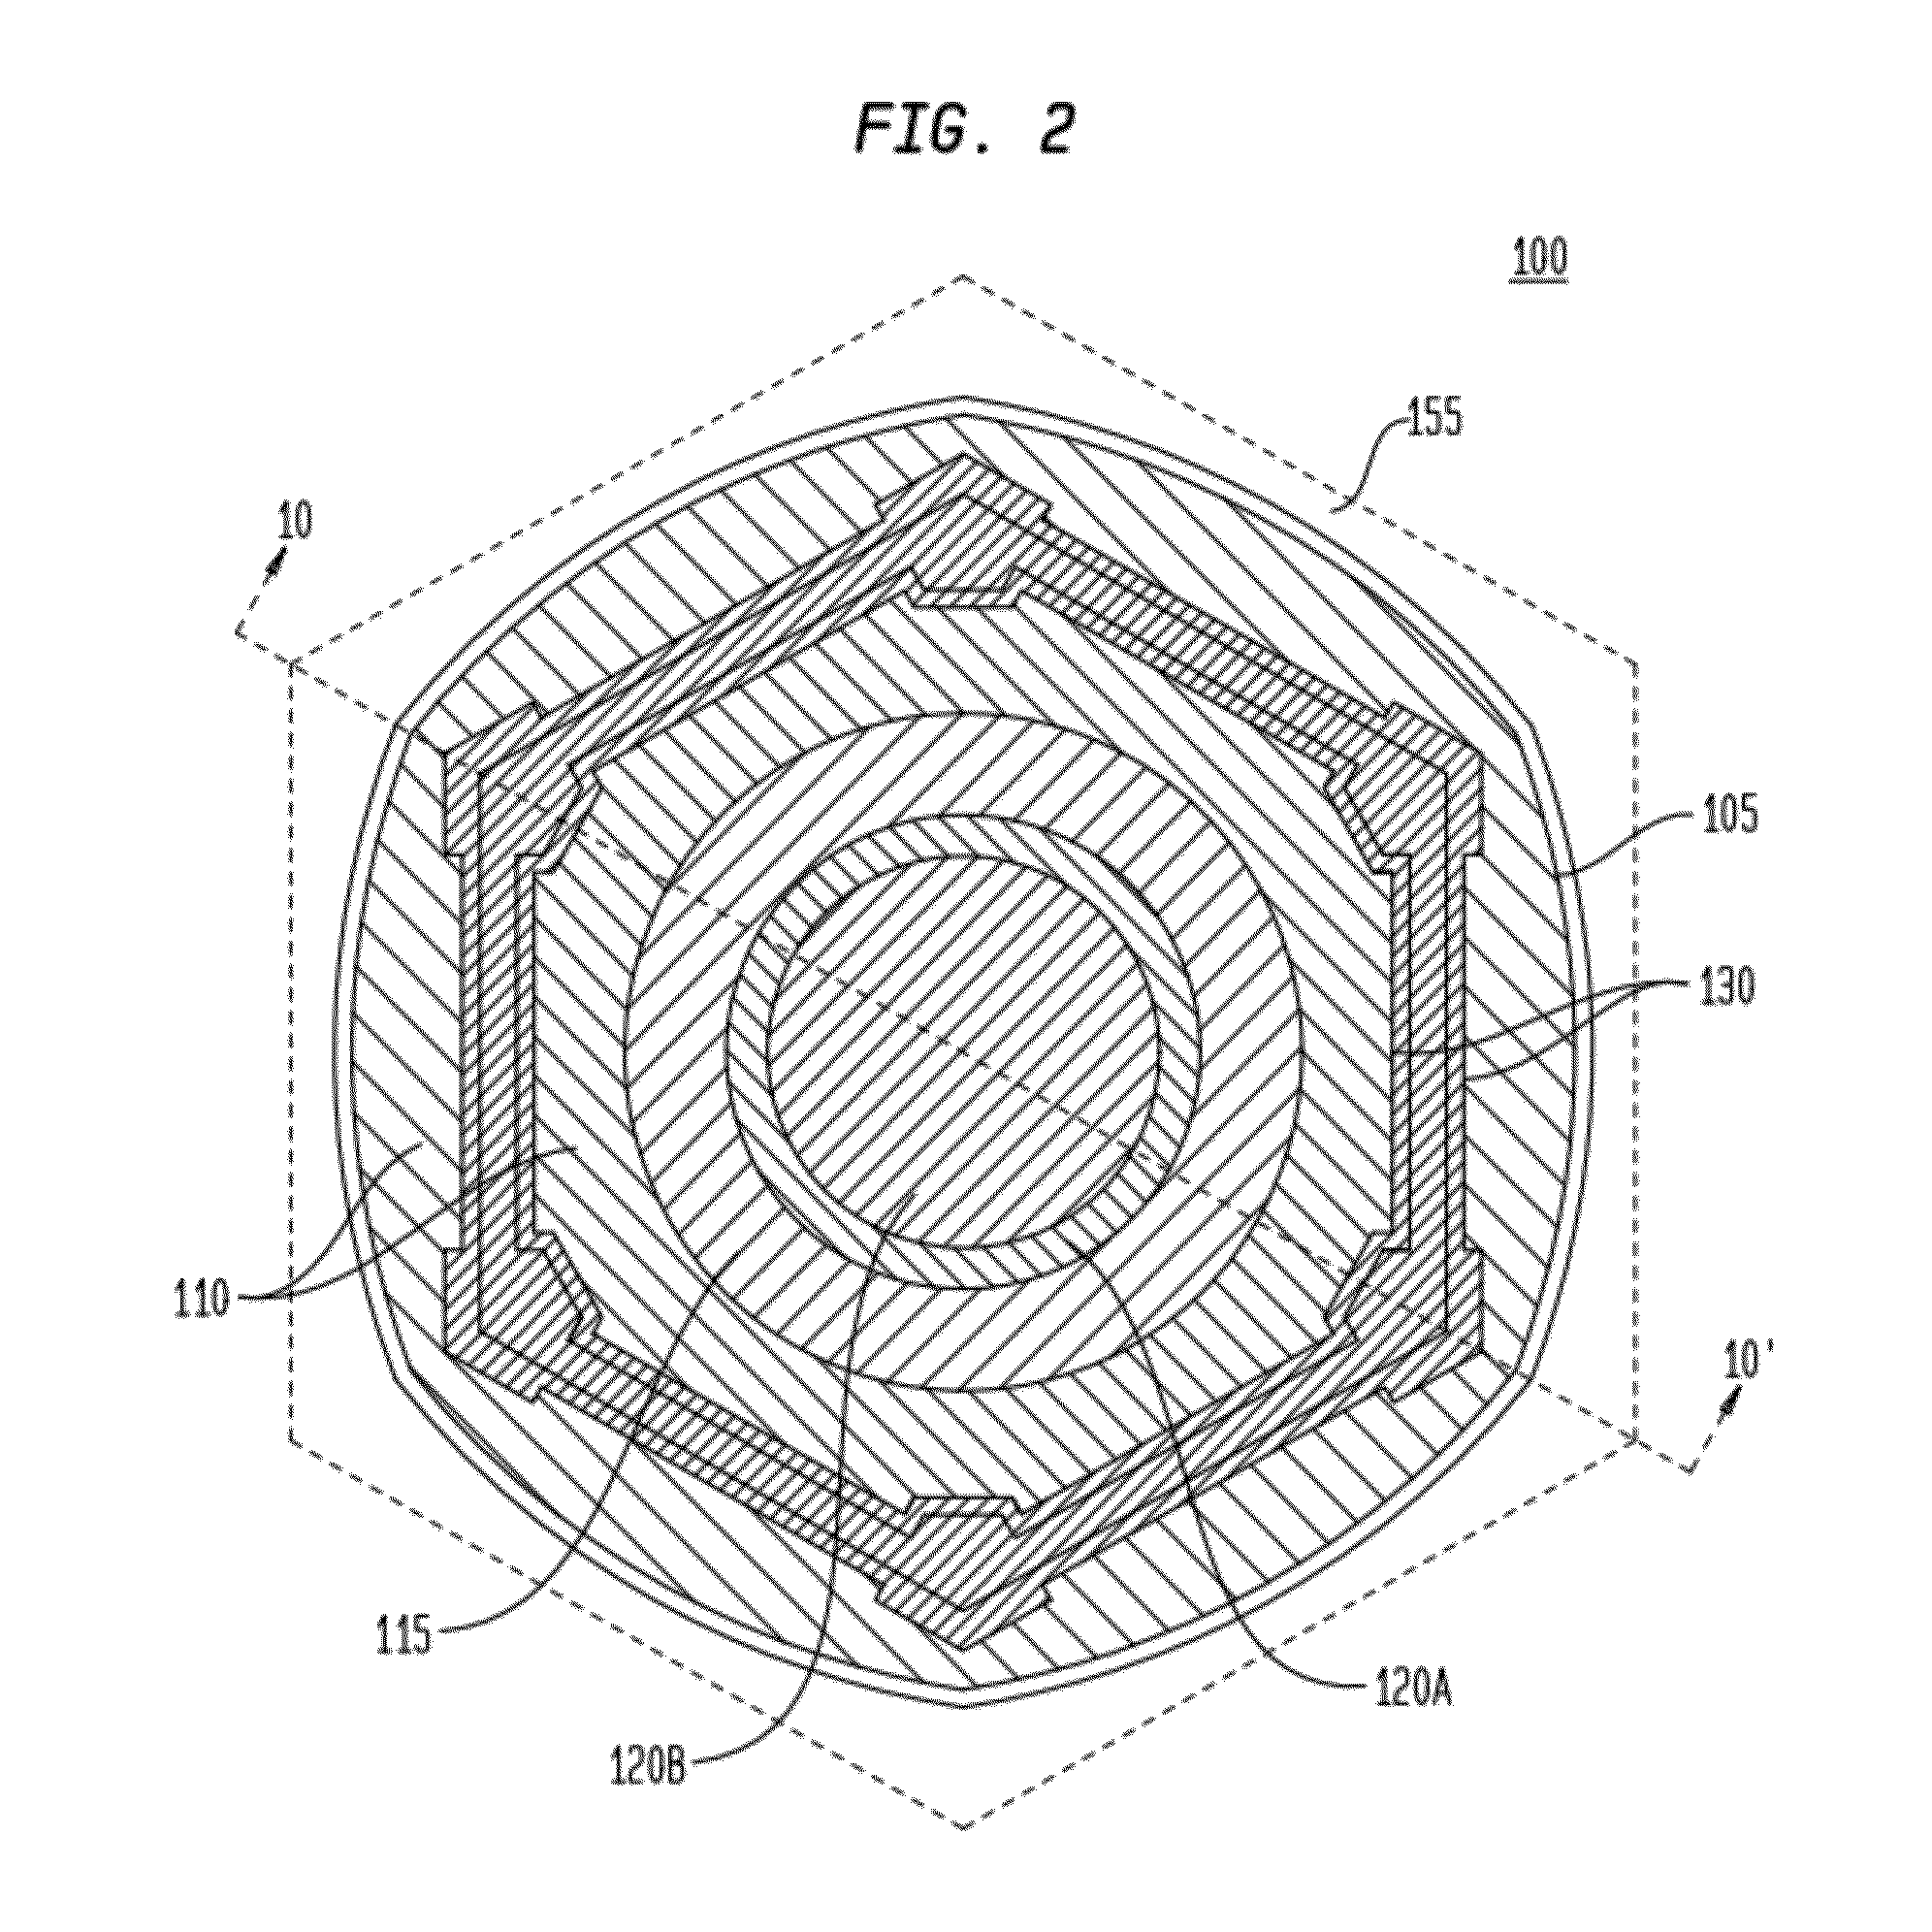 Light Emitting, Power Generating or Other Electronic Apparatus